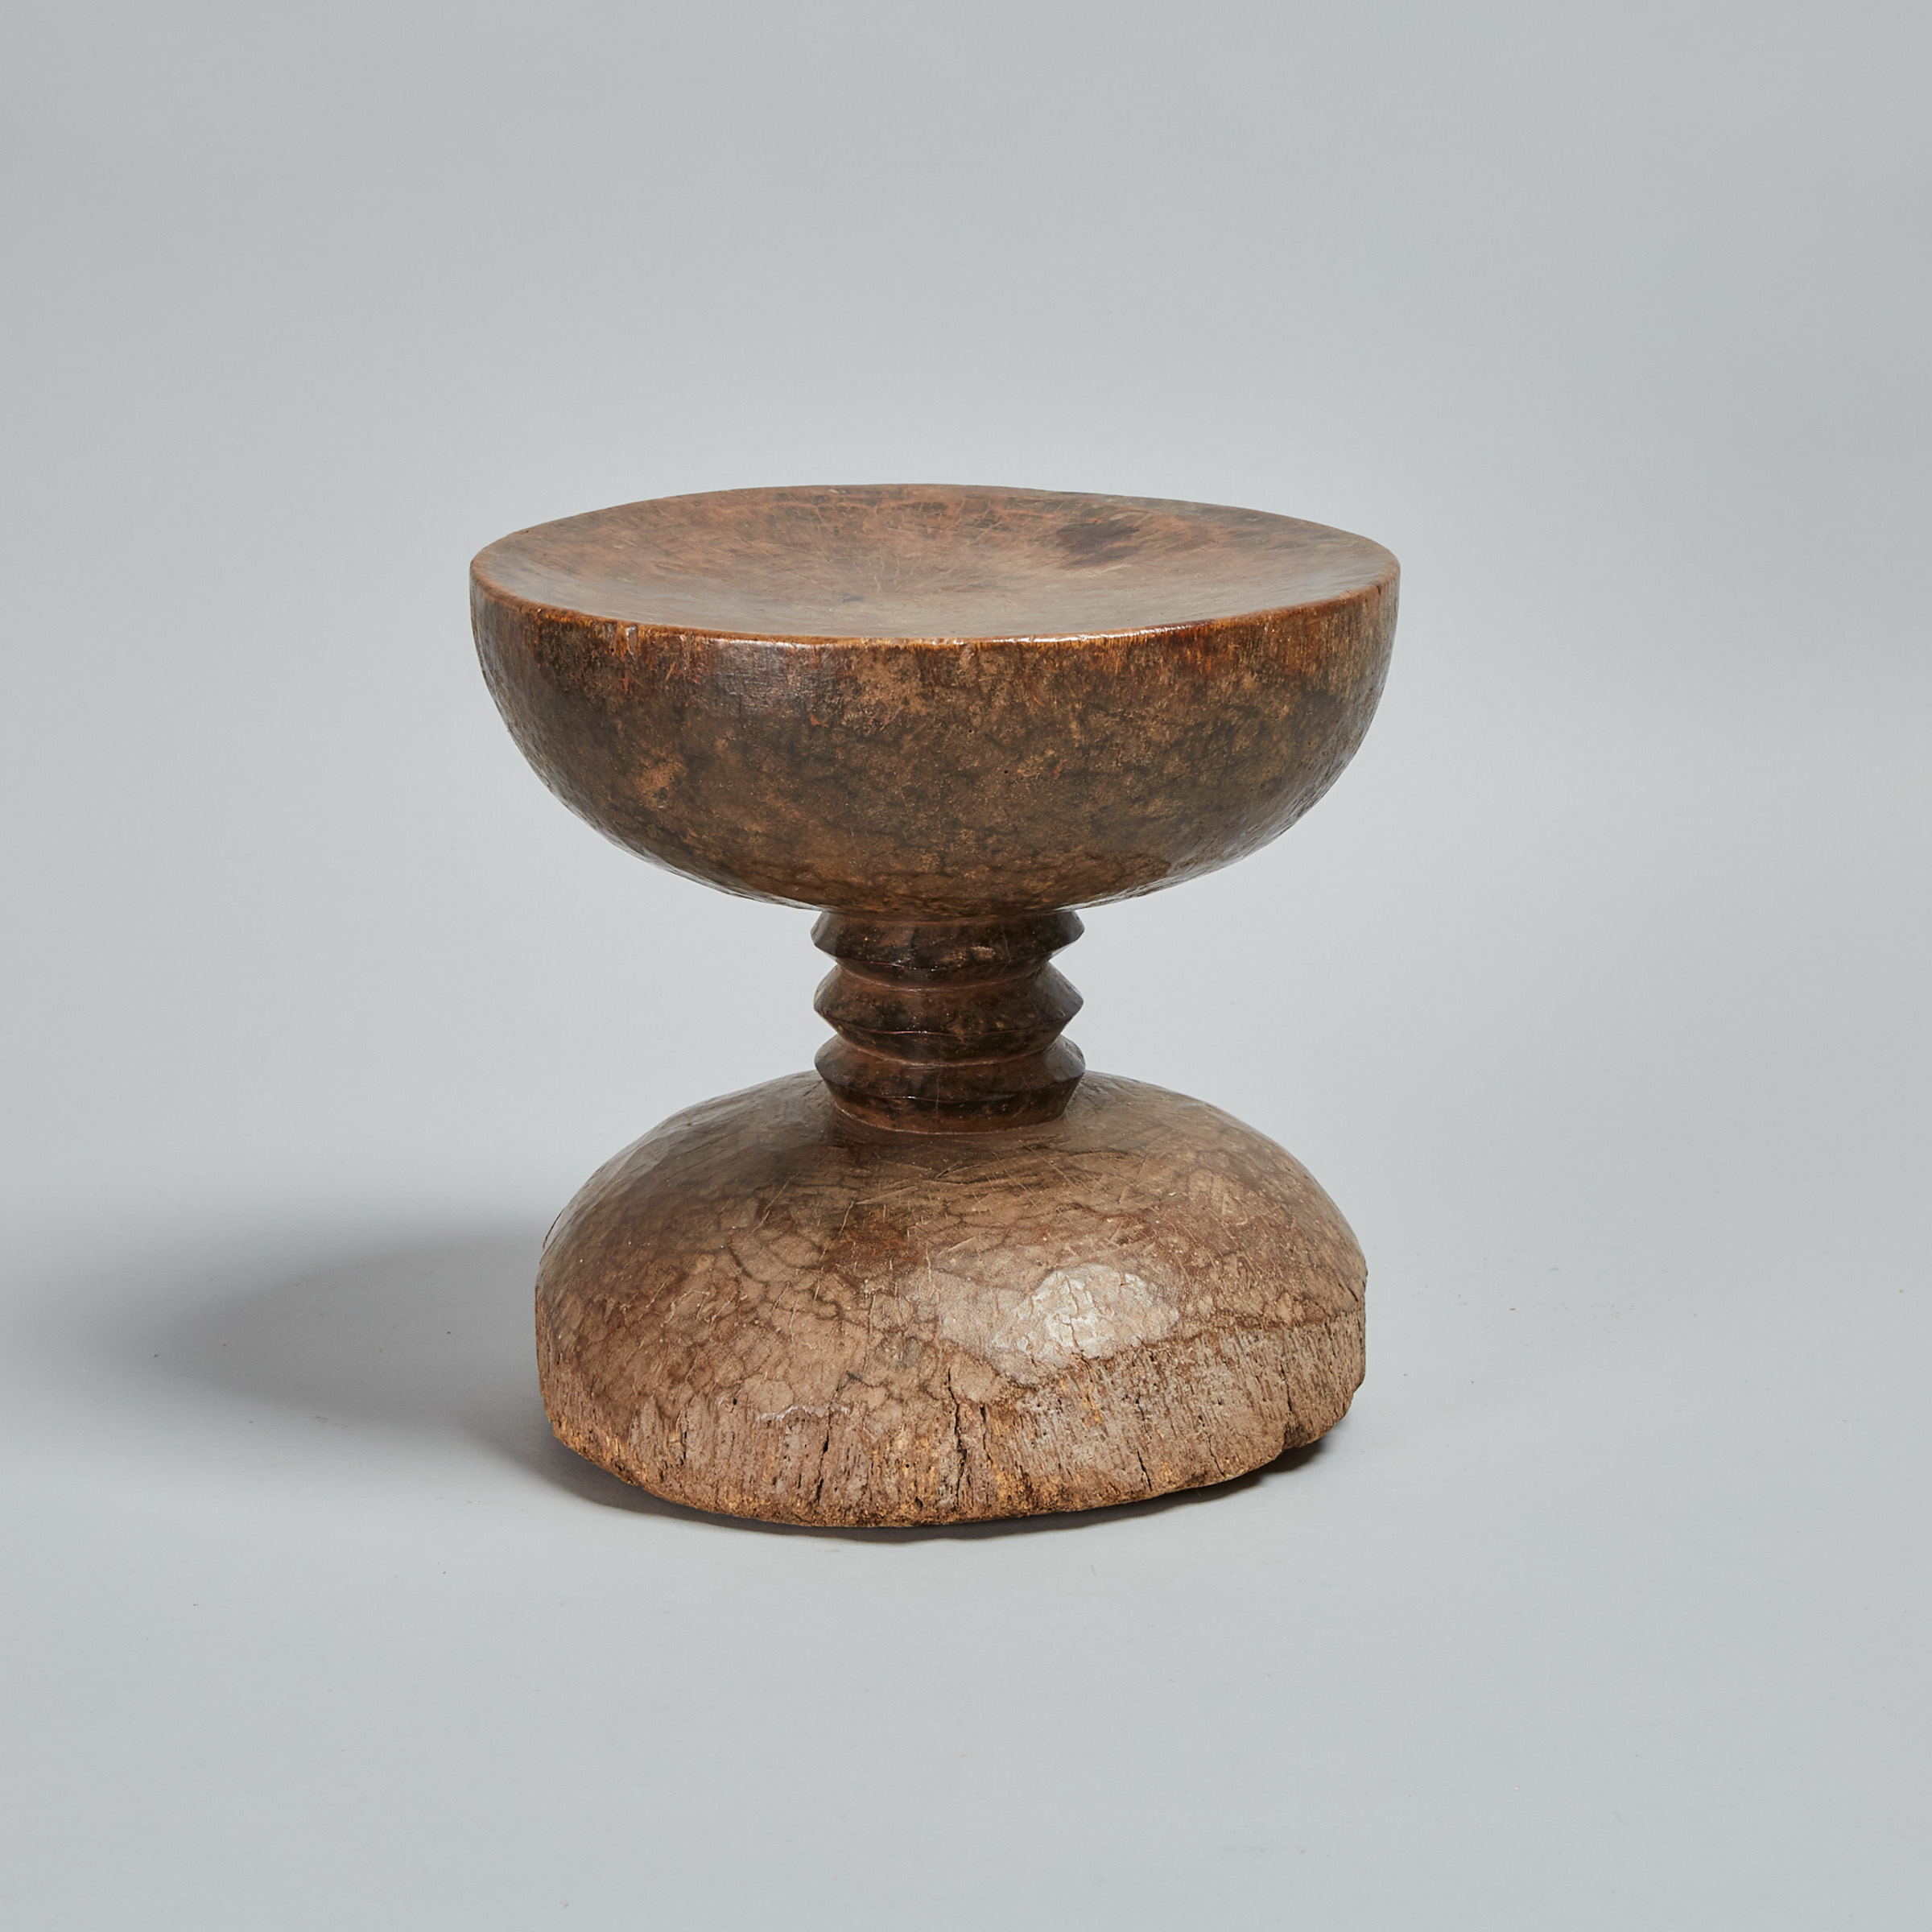 African Carved Wood Stool, possibly Dogon, Mail, West Africa